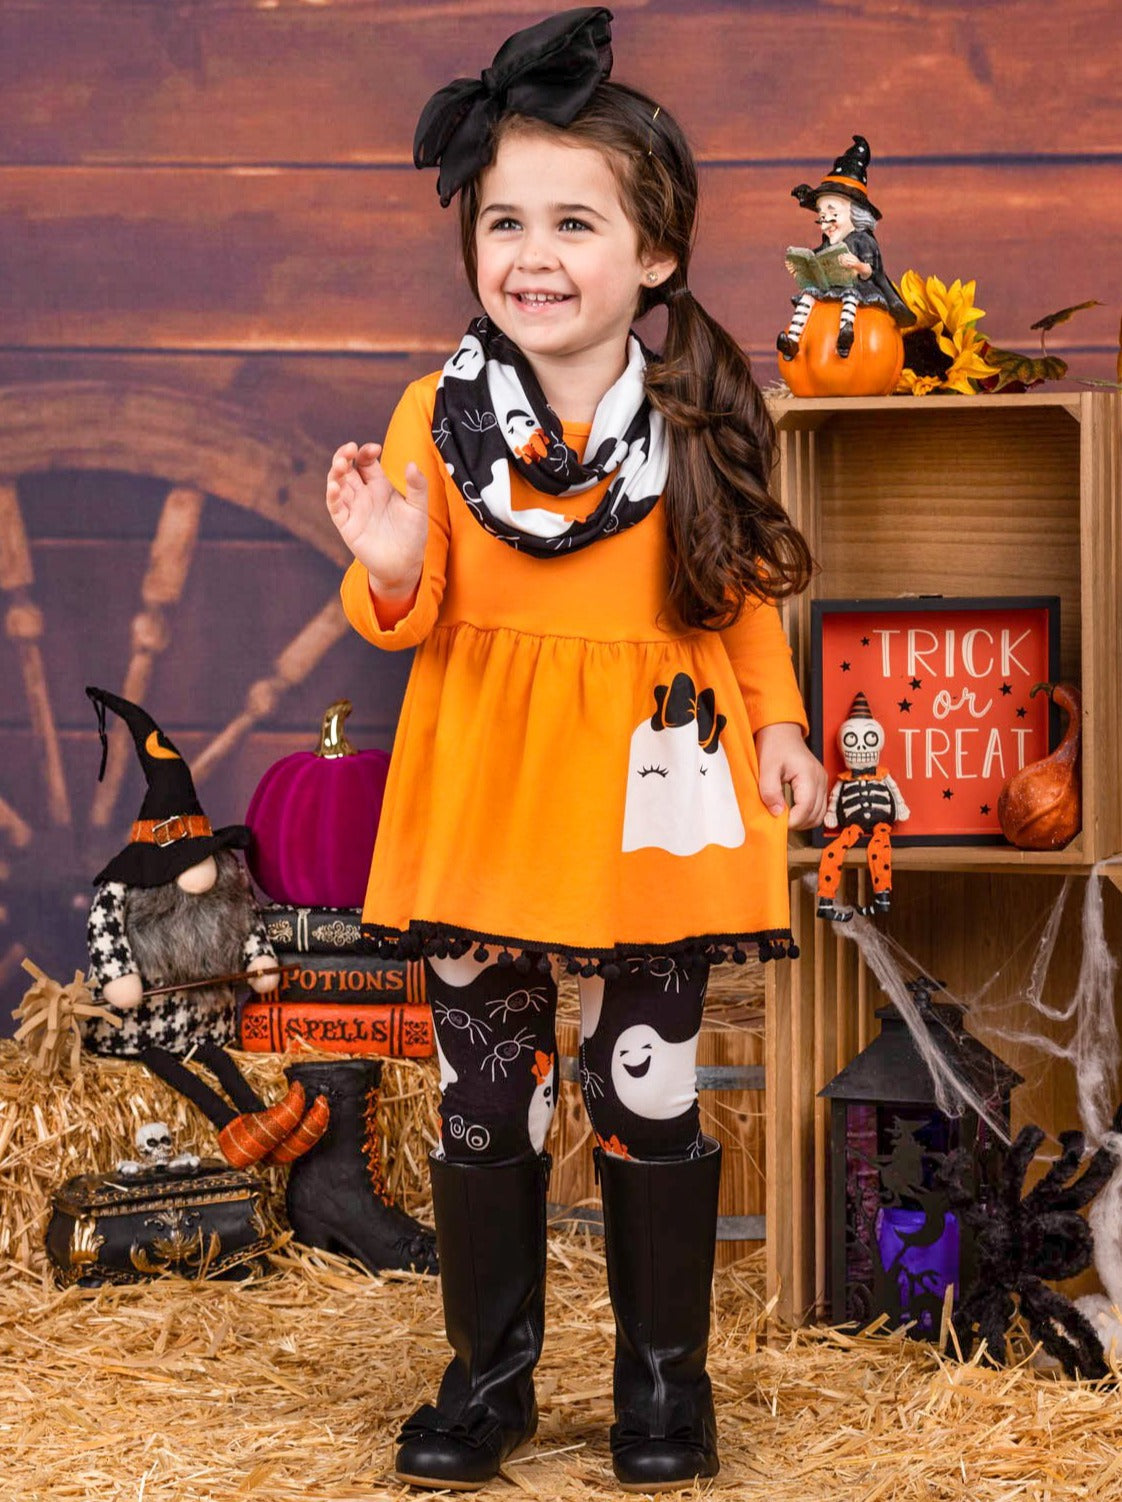 Little girls Halloween long-sleeve tunic with ghost graphic on the skirt, pom-pom, ghost print leggings, and matching infinity wrap scarf - Mia Belle Girls